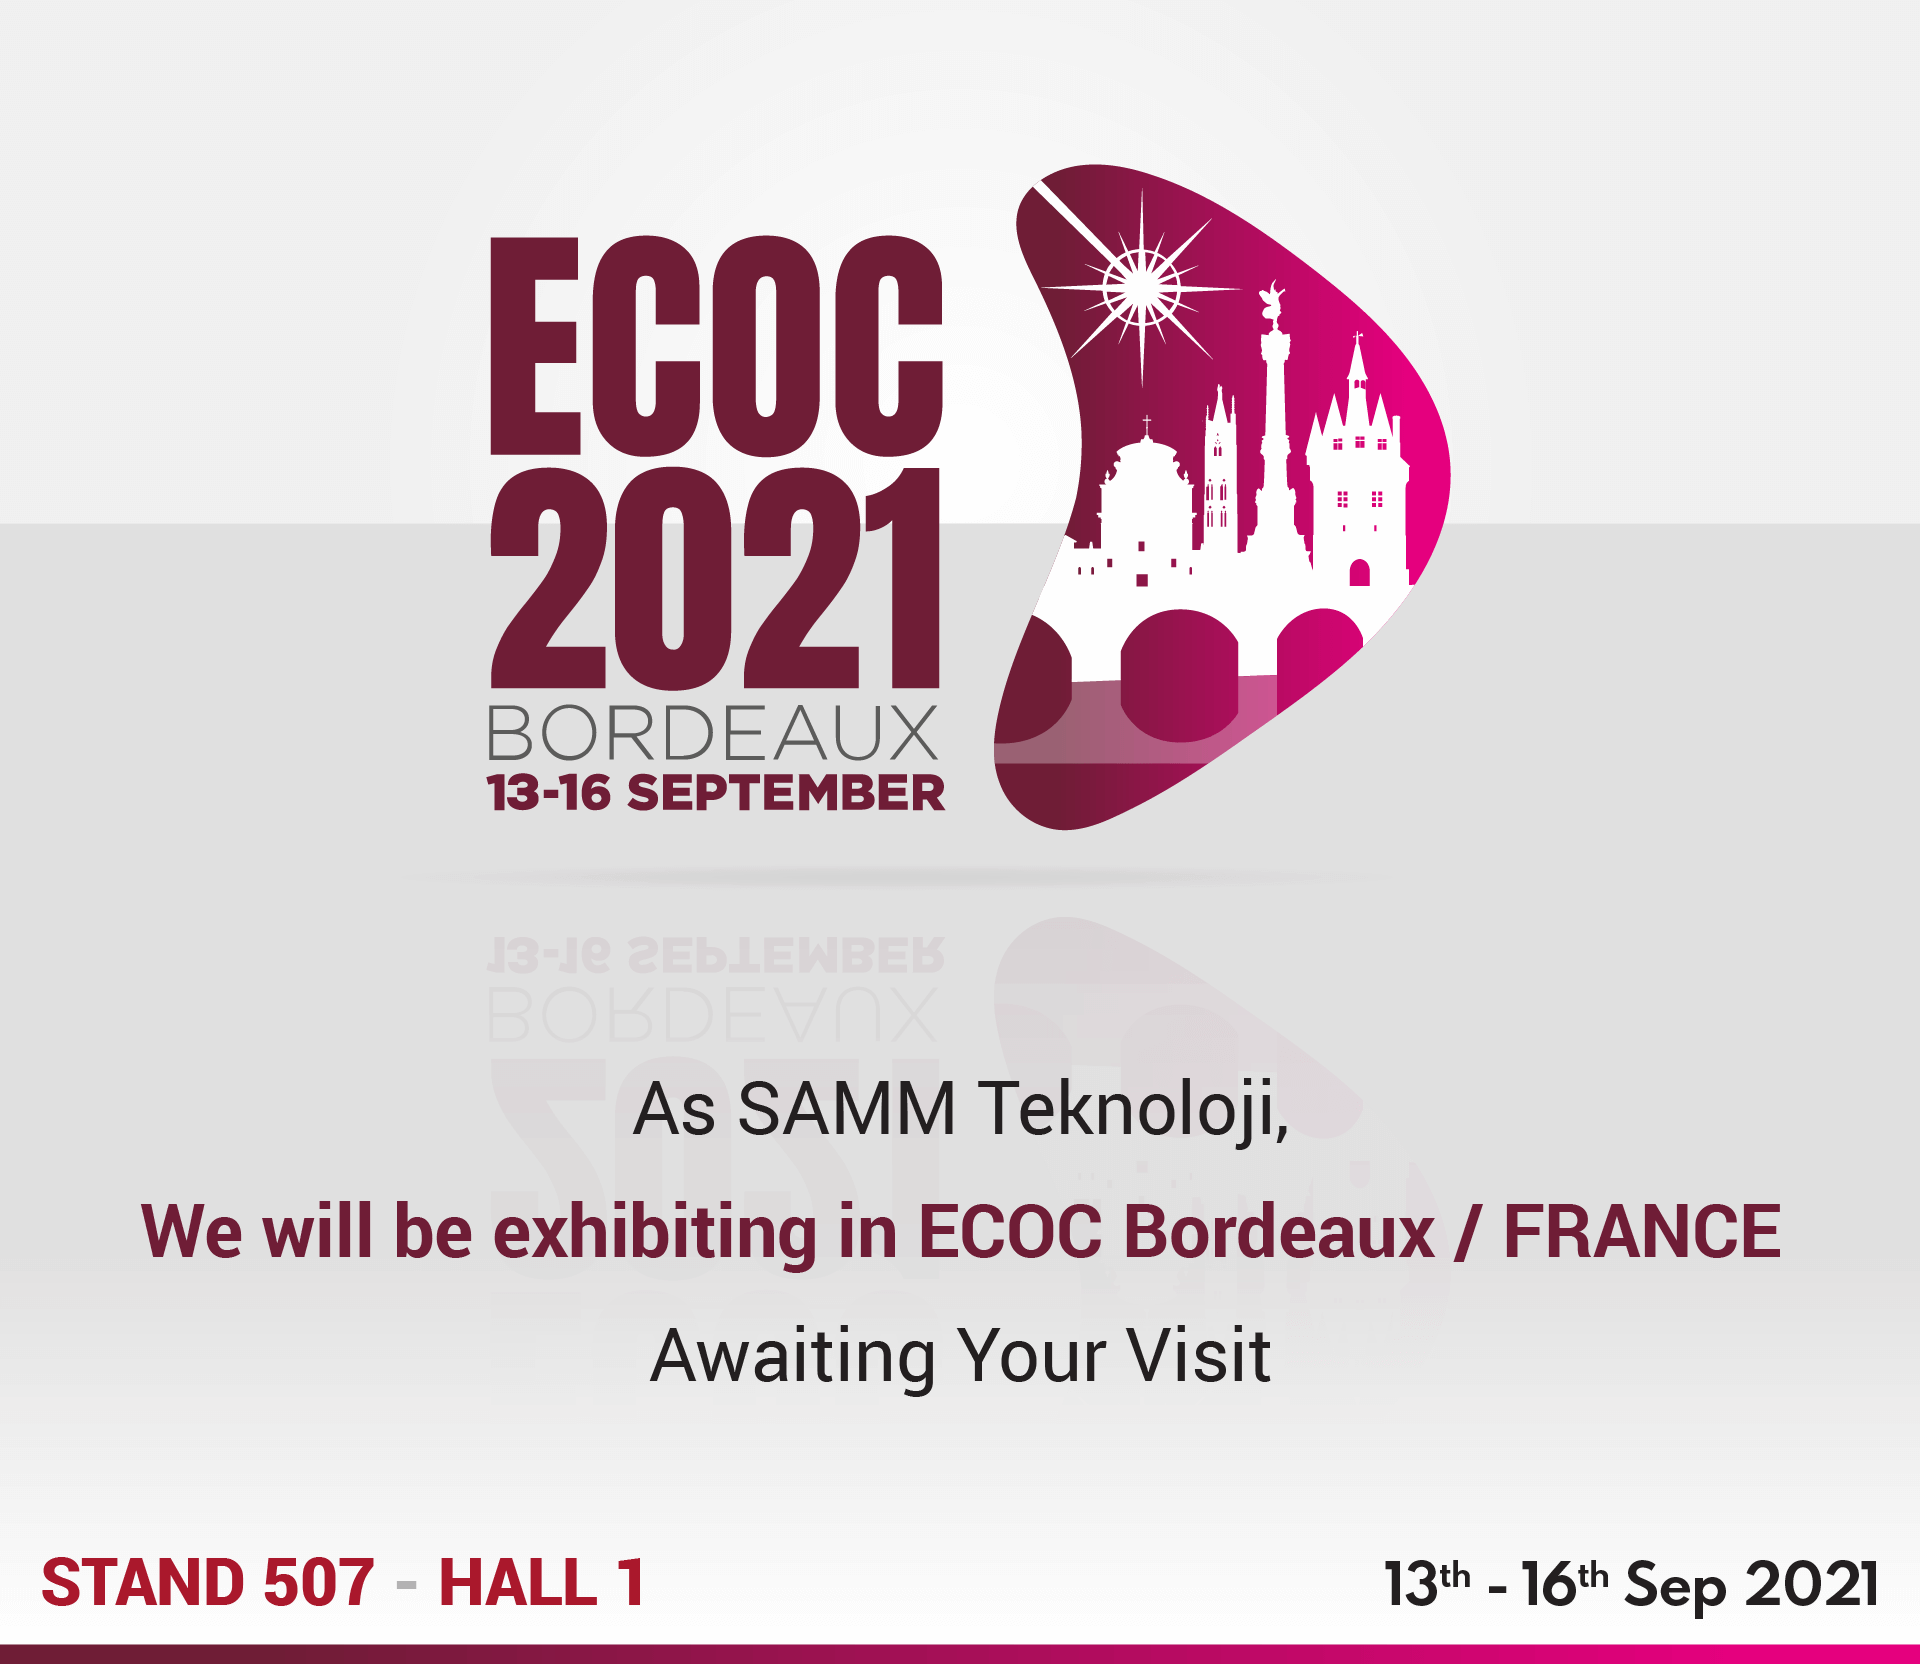 SAMM Will Be Exhibiting in ECOC Bordeaux, FRANCE